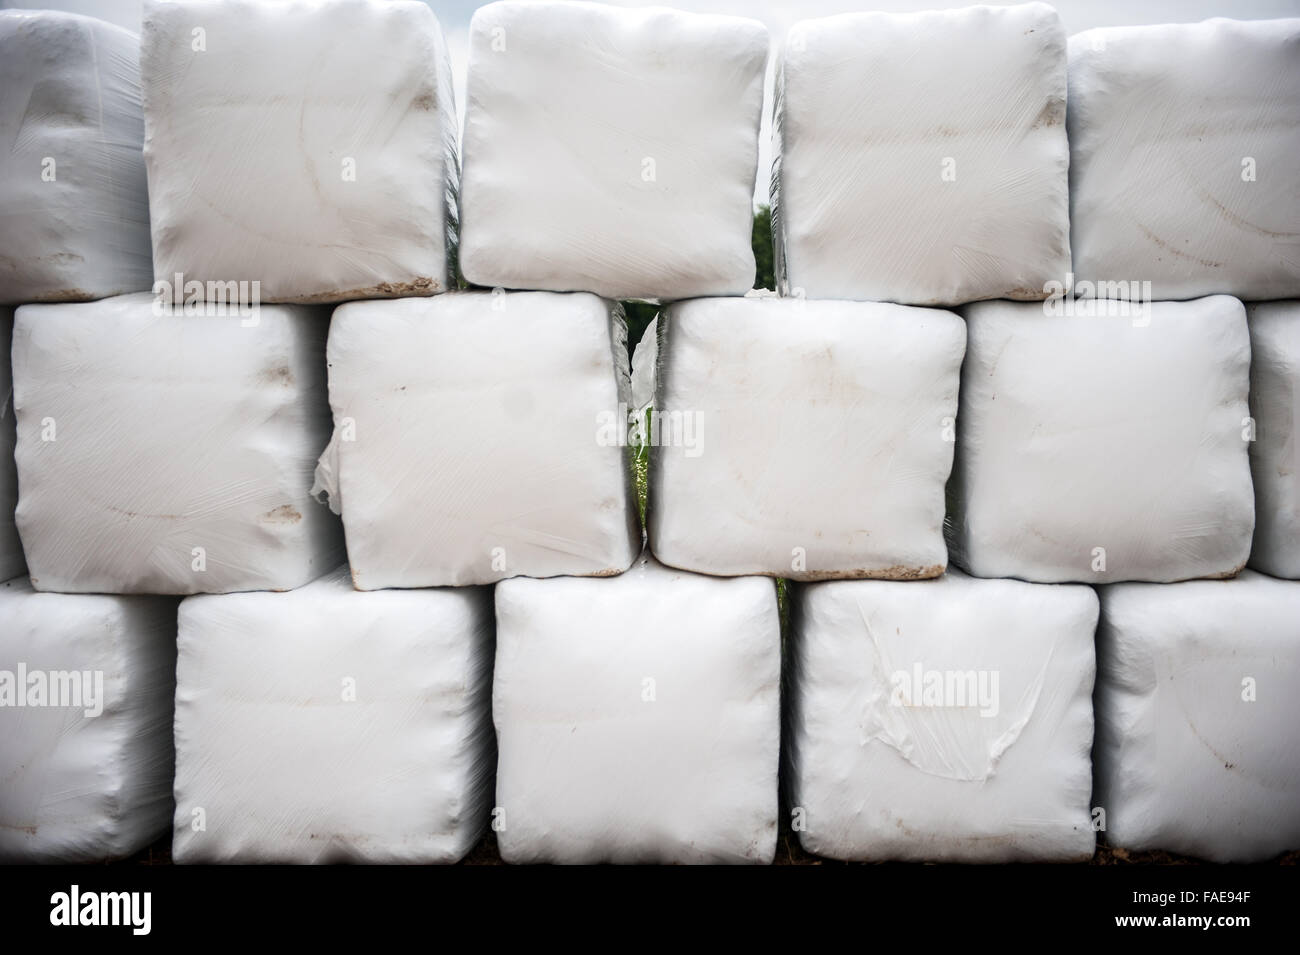 Packaged bales of hay wrapped in white plastic Stock Photo